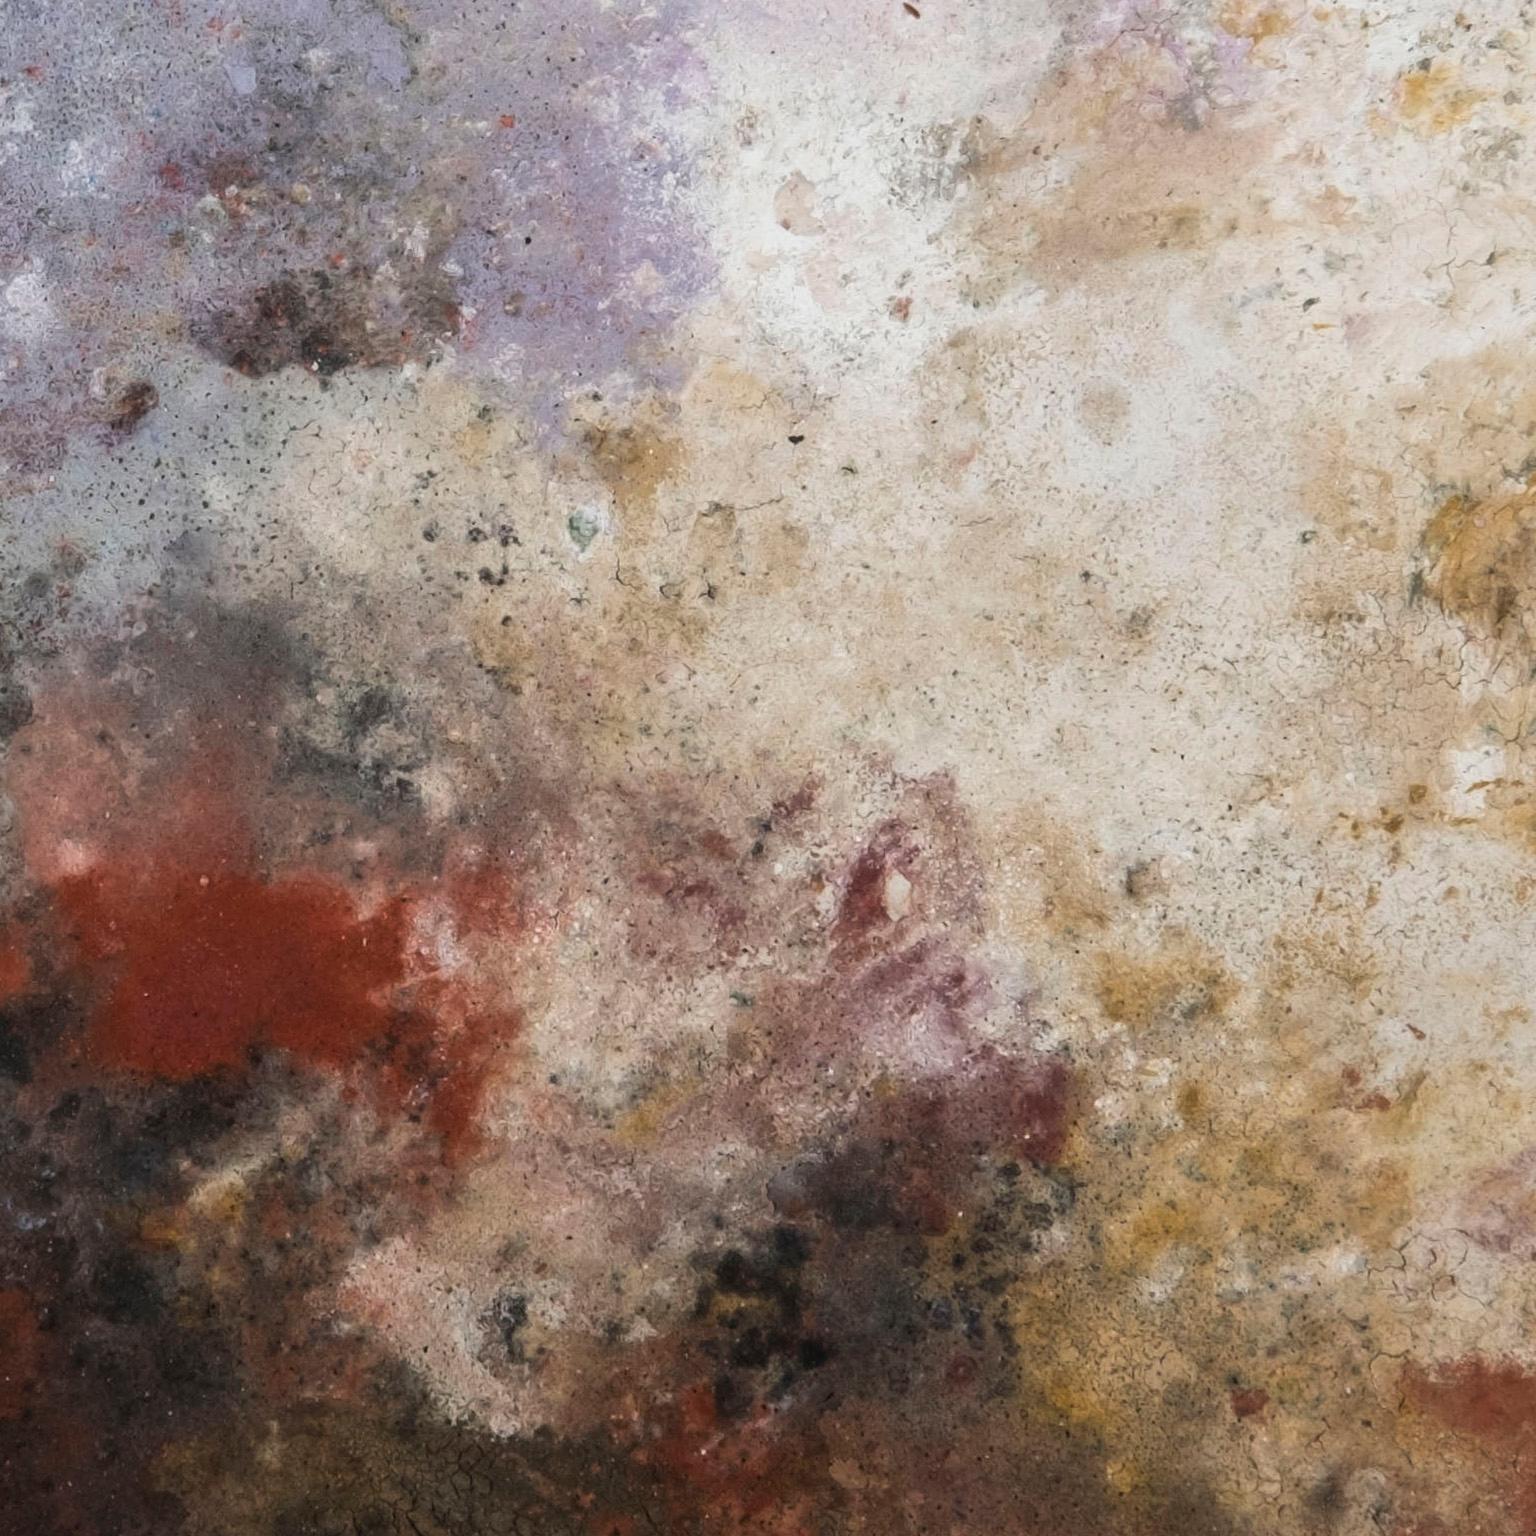 Terra Bruciata #13 (Scorched Earth) - Abstract Blue, Purple, and Red Painting 1